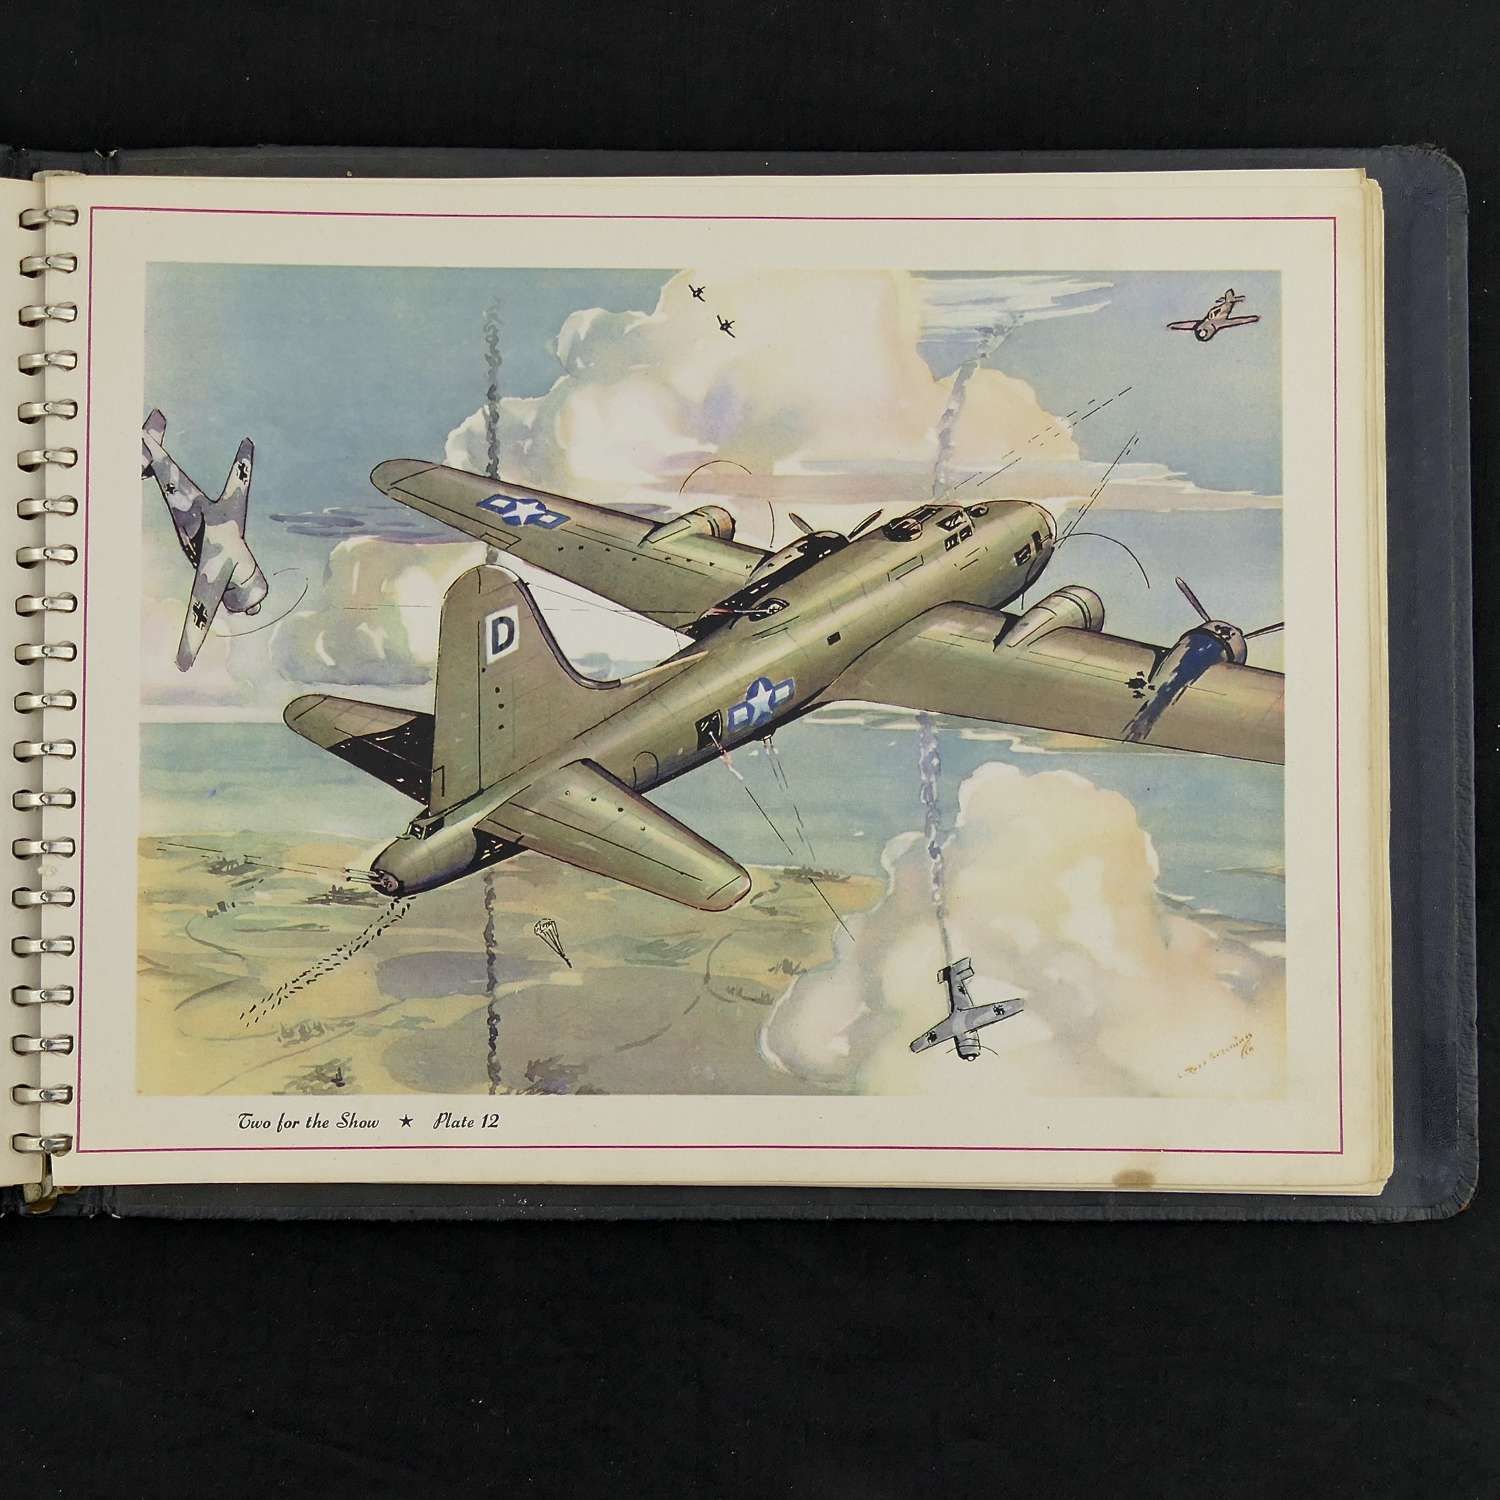 Not As Briefed - Rare AAF P-o-W book, 460th BG history